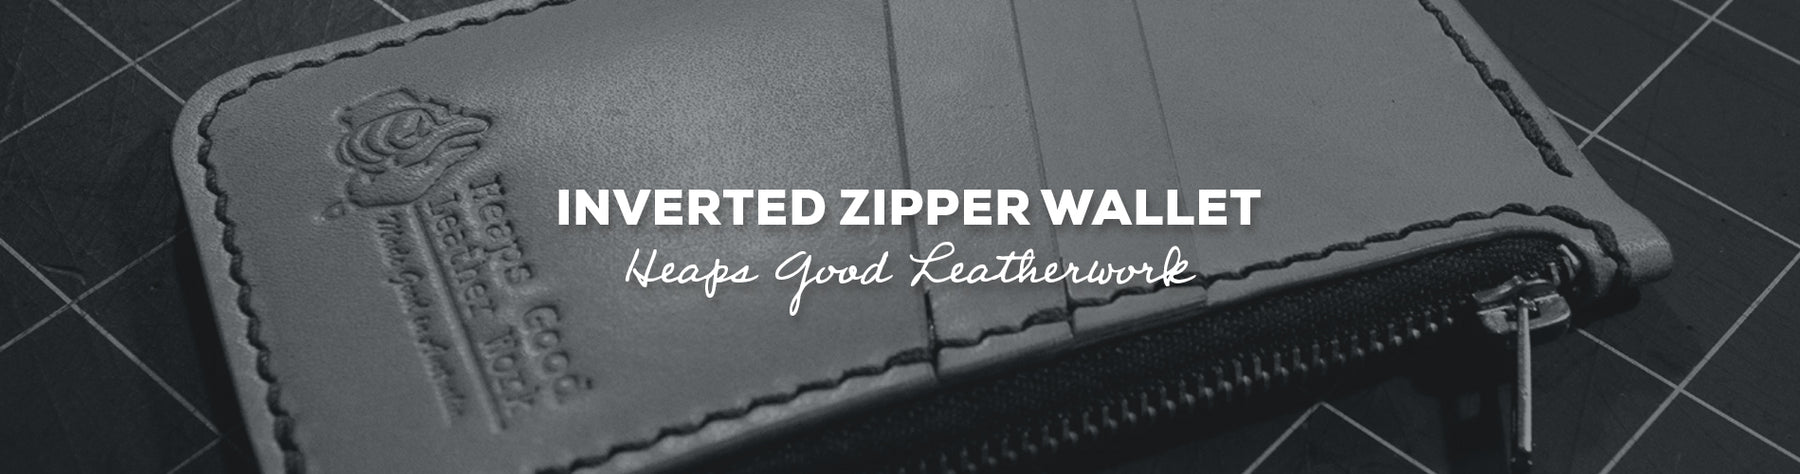 Gift Idea: Inverted Zipper Wallet with Heaps Good Leather Work